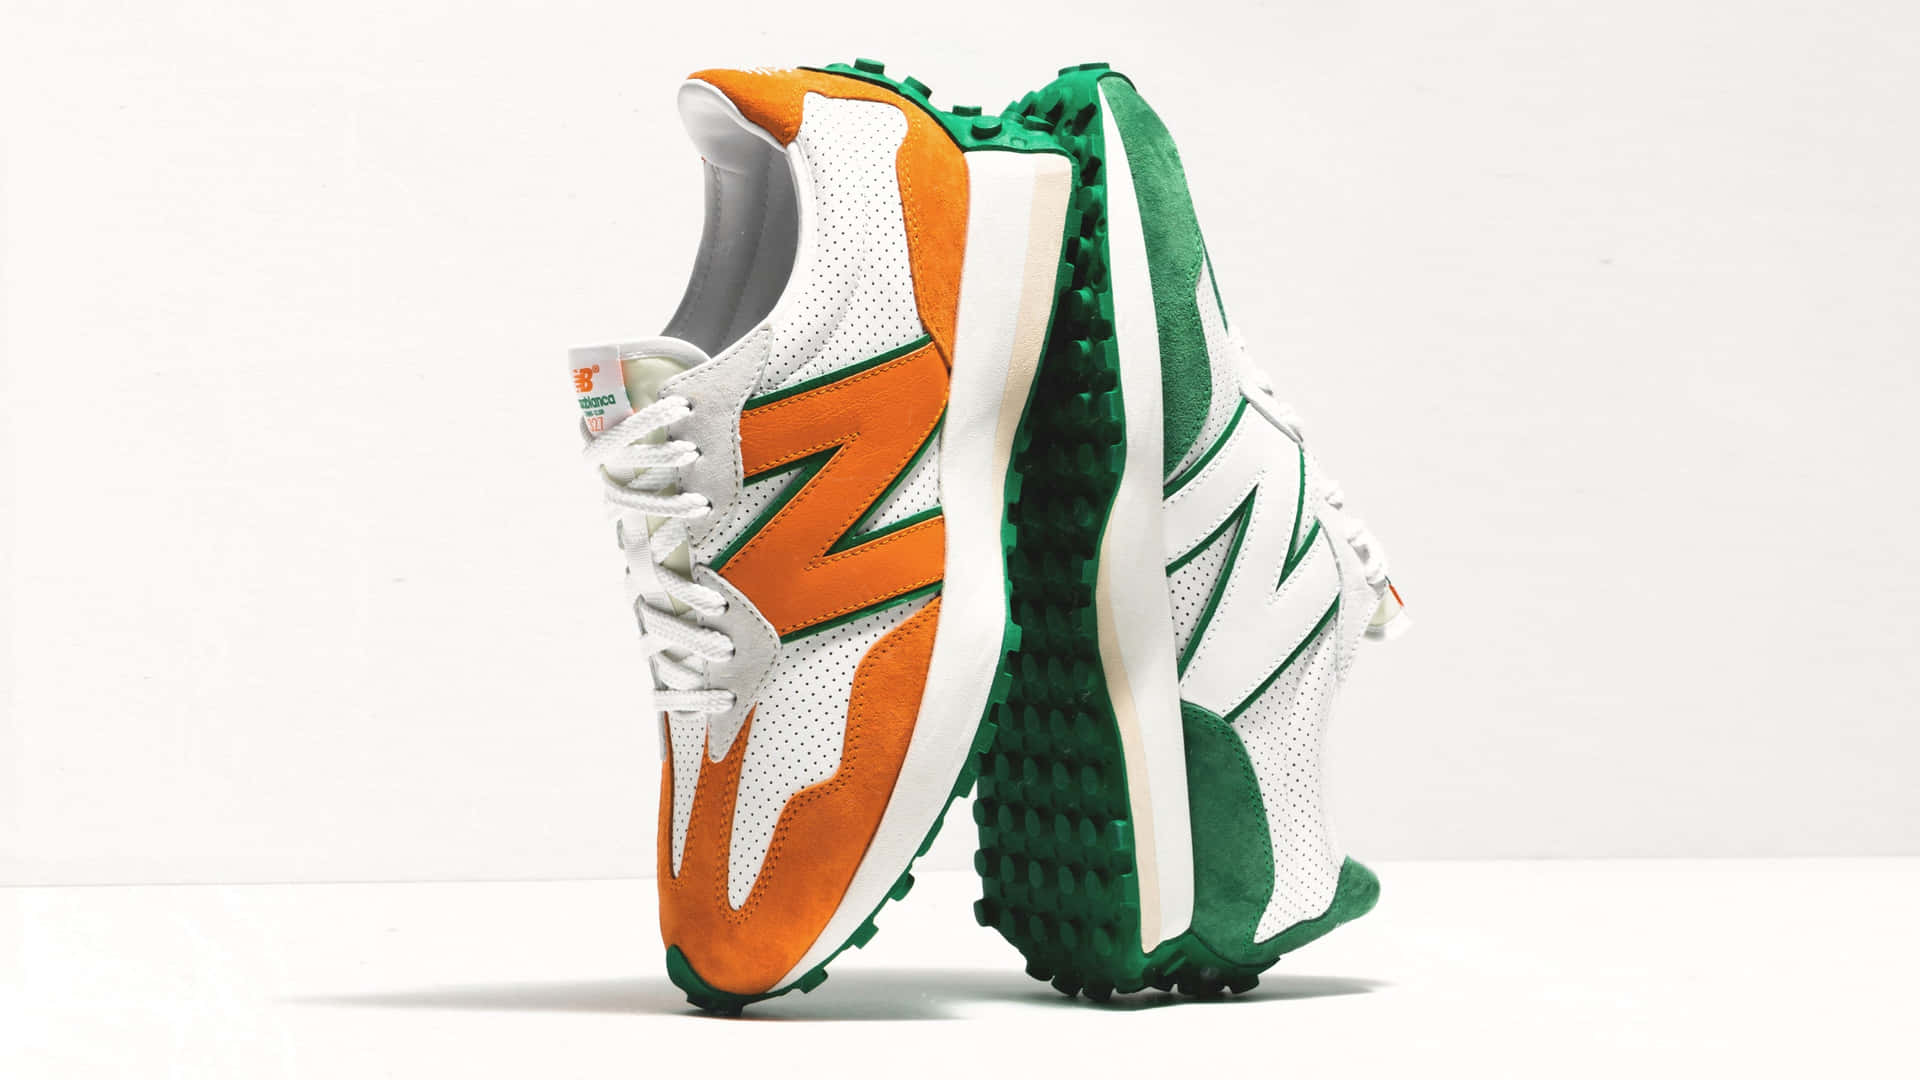 Rock the streets in style with New Balance trainers